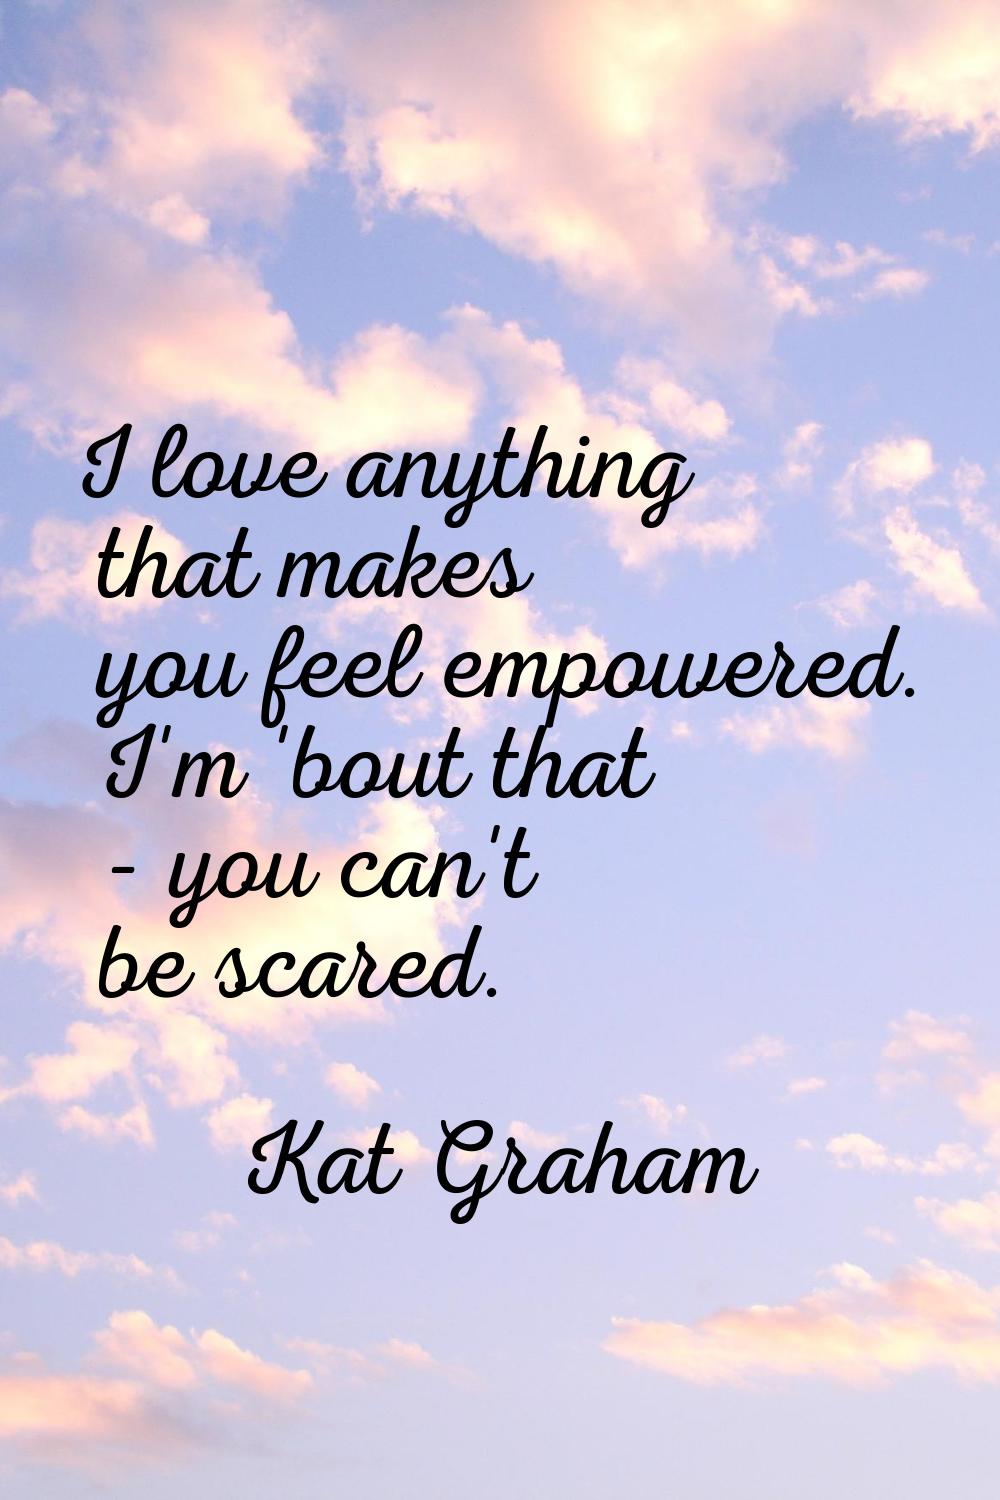 I love anything that makes you feel empowered. I'm 'bout that - you can't be scared.